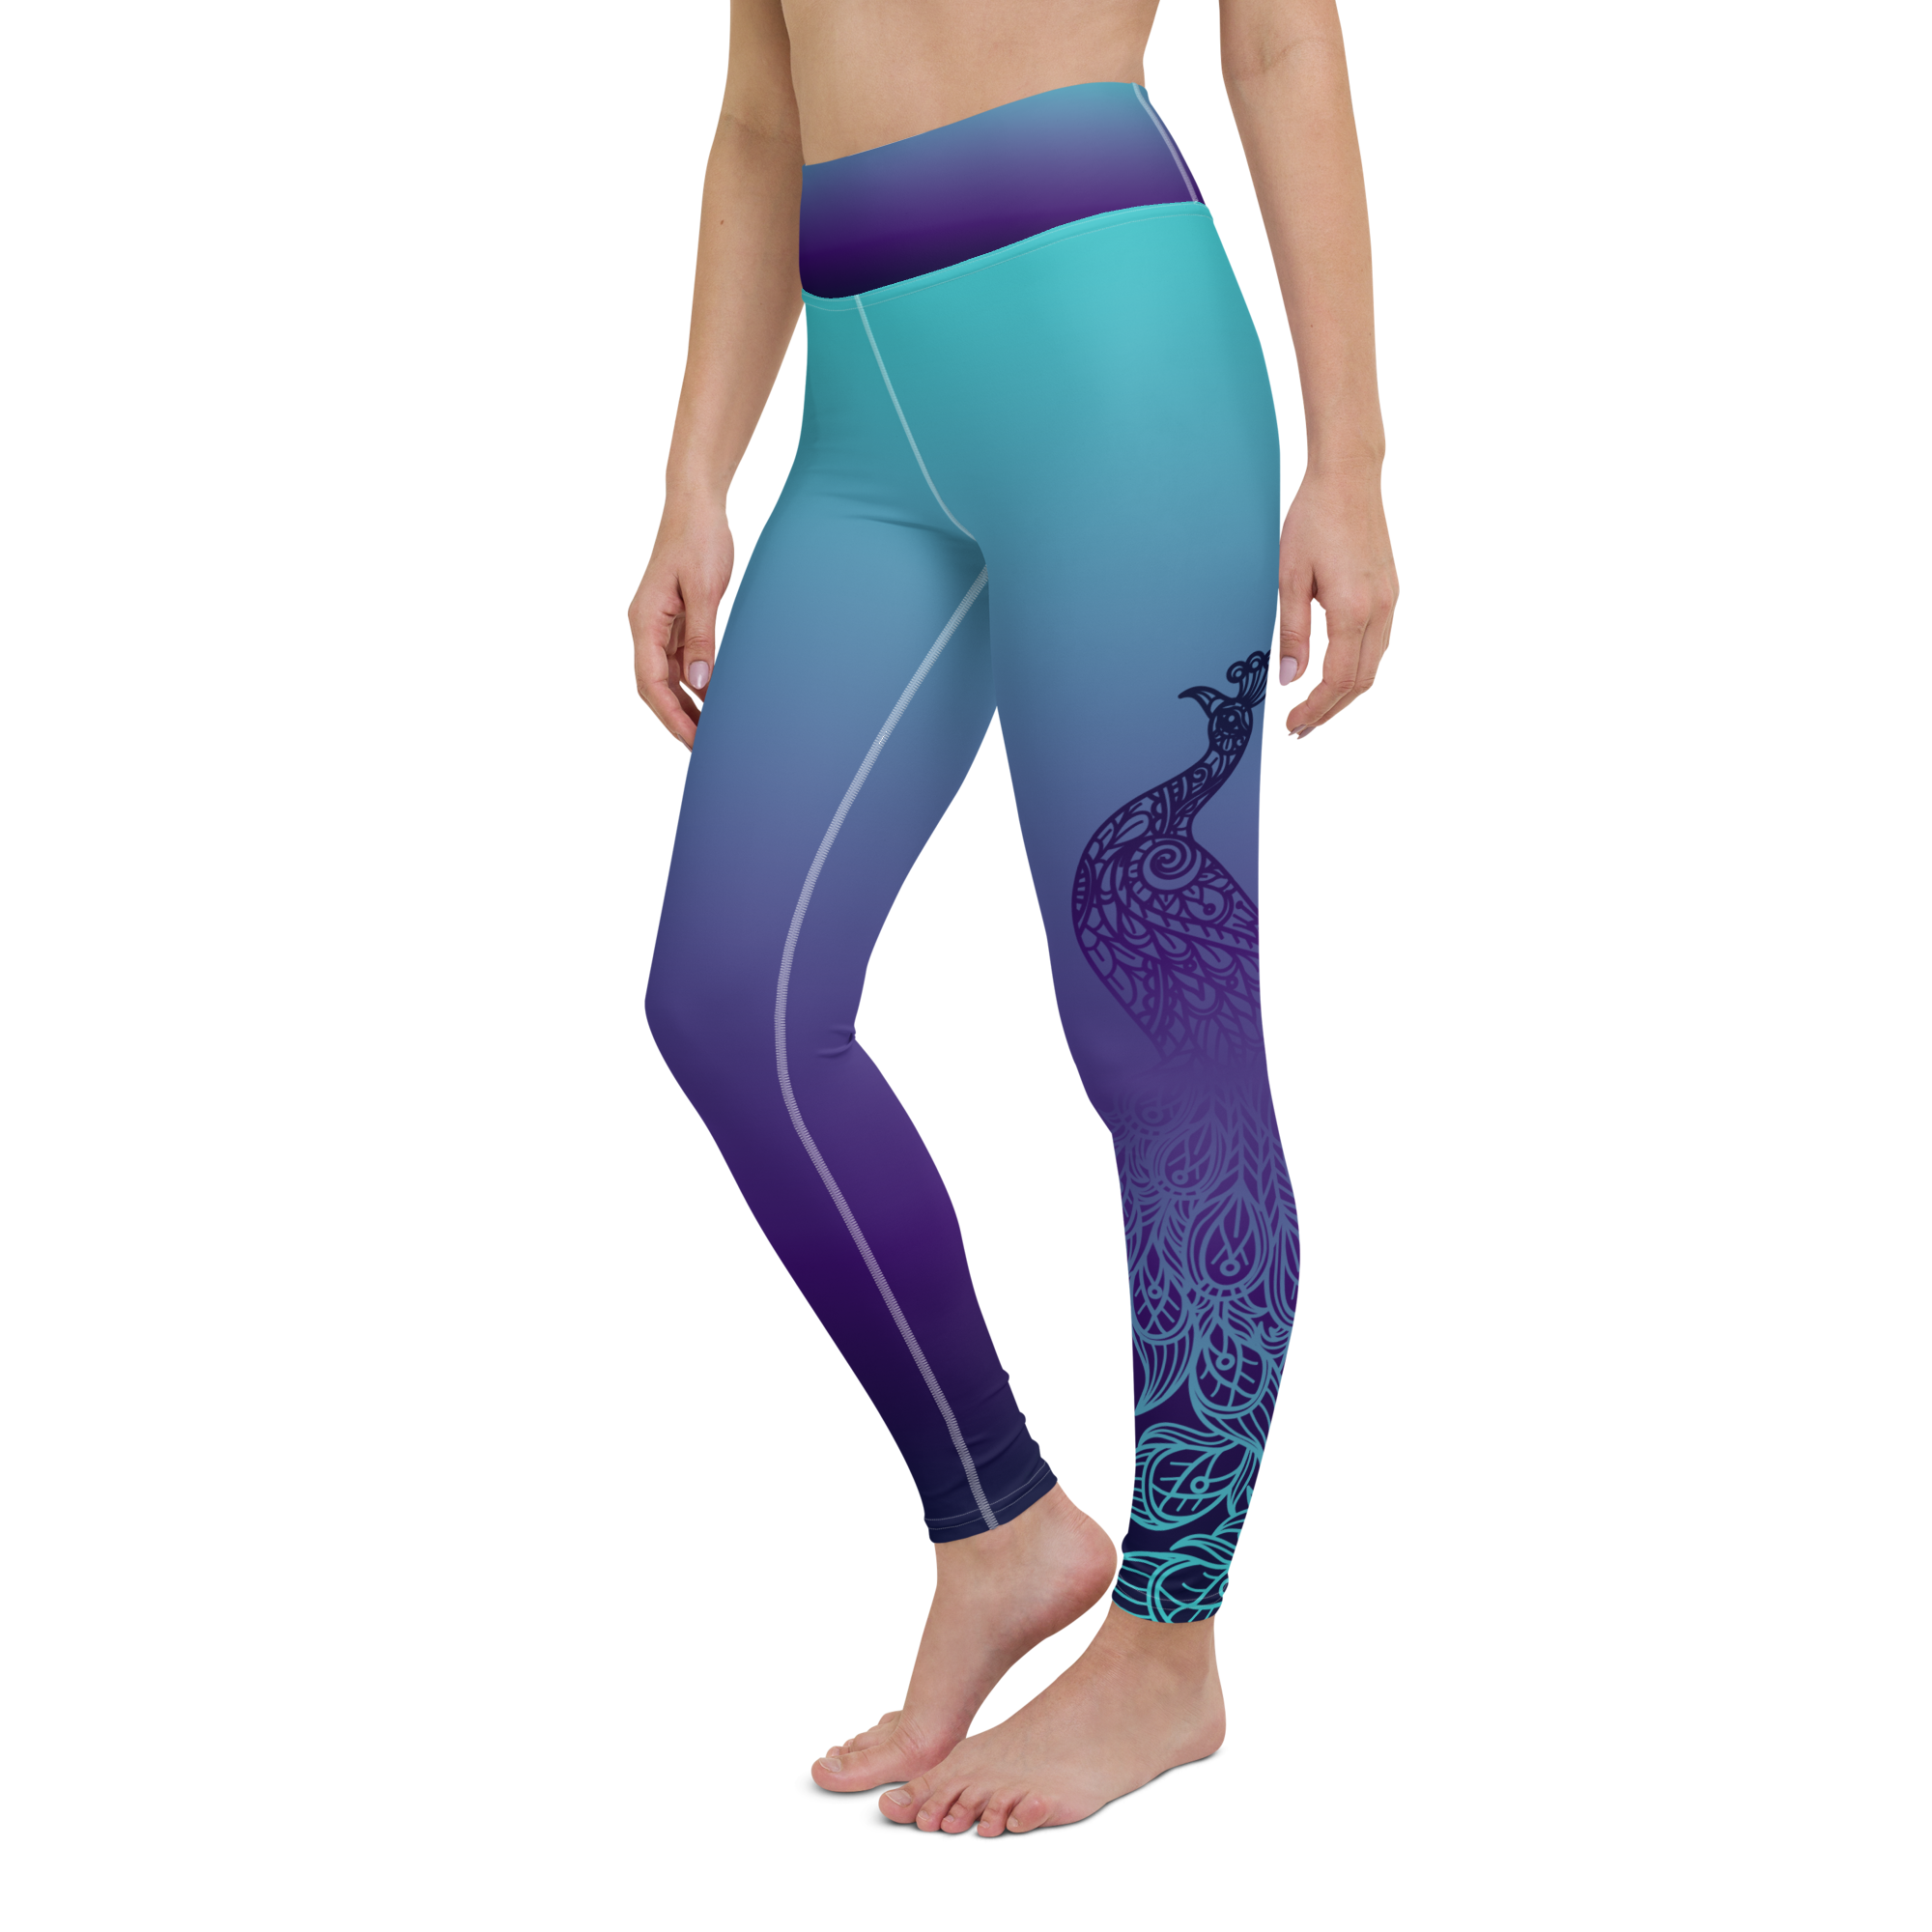 Women's leggings for the most demanding athletes and intensive activities